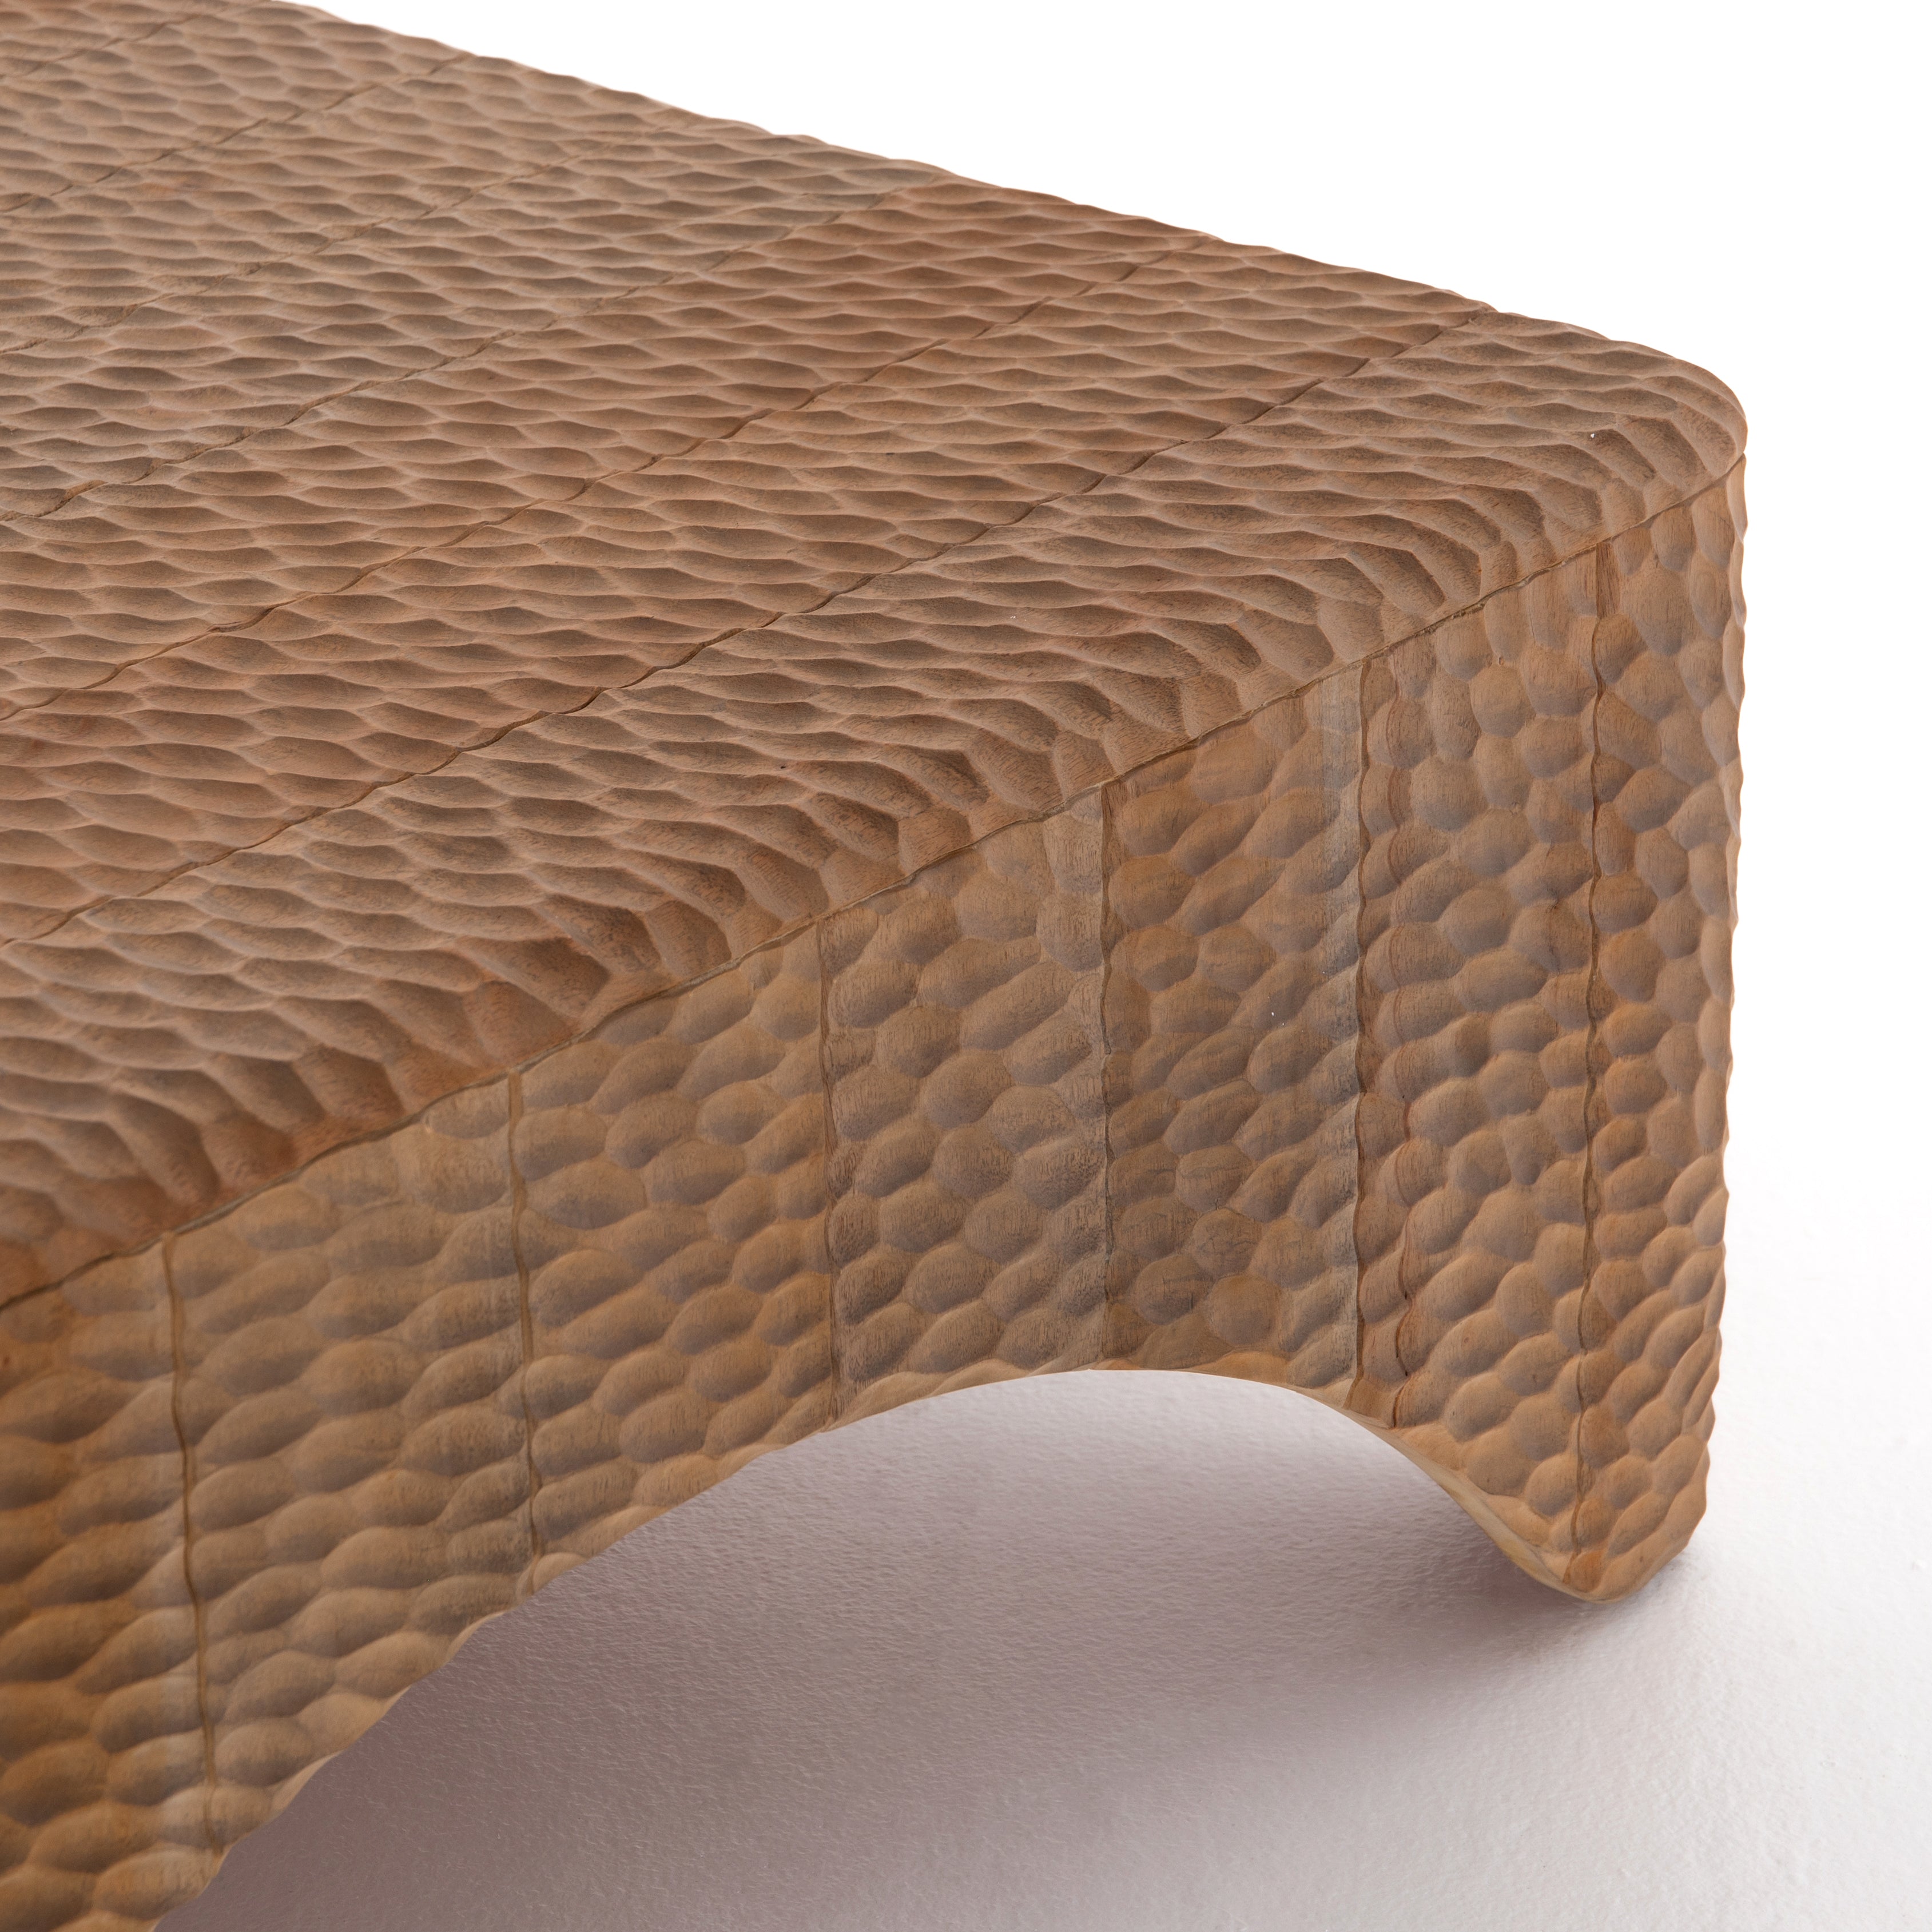 Inspired by rare 18th-century sake flasks, Atrumed Coffee Table is solid mahogany thoughtfully hand carved, creating a textural, dimple-like look with warm, sun-bleached undertones. Unique variations to be expected, and speak to this piece's handmade nature.  Available Mid September 2020.   Overall Dimensions: 40"w x 40"d x 16"h Materials: Mahogany